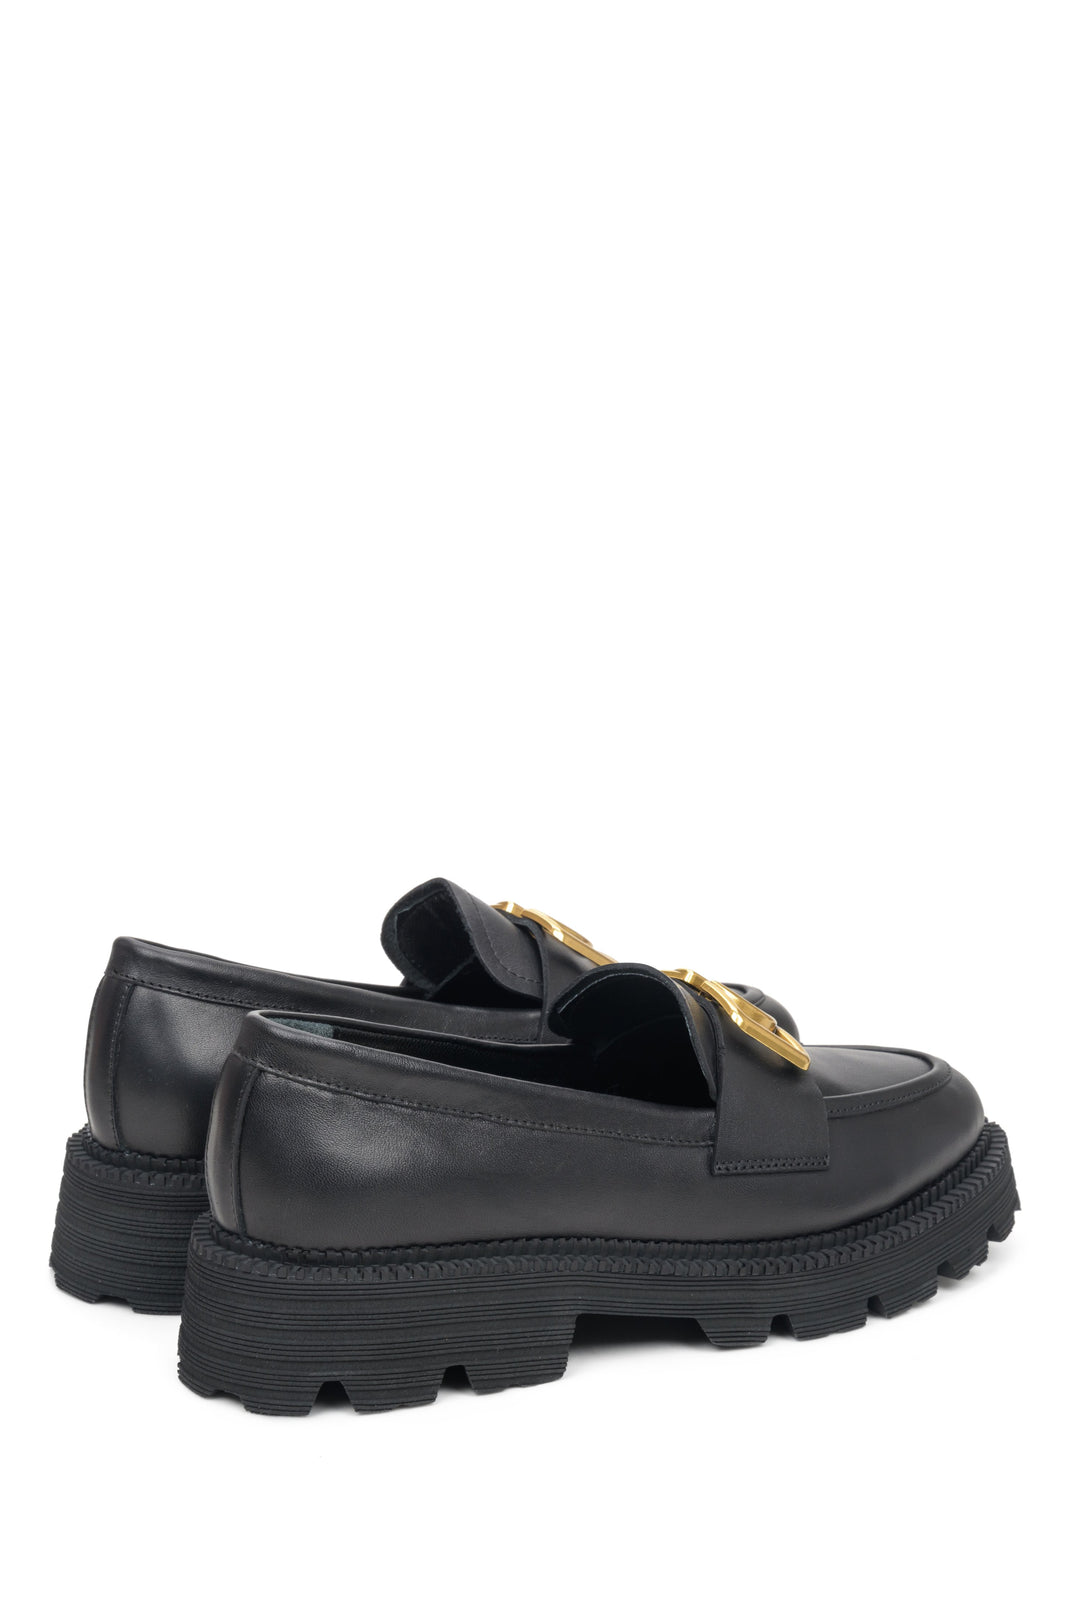 Women's black leather loafers with gold chain by Estro - presentation of the shoe side and heel counter.